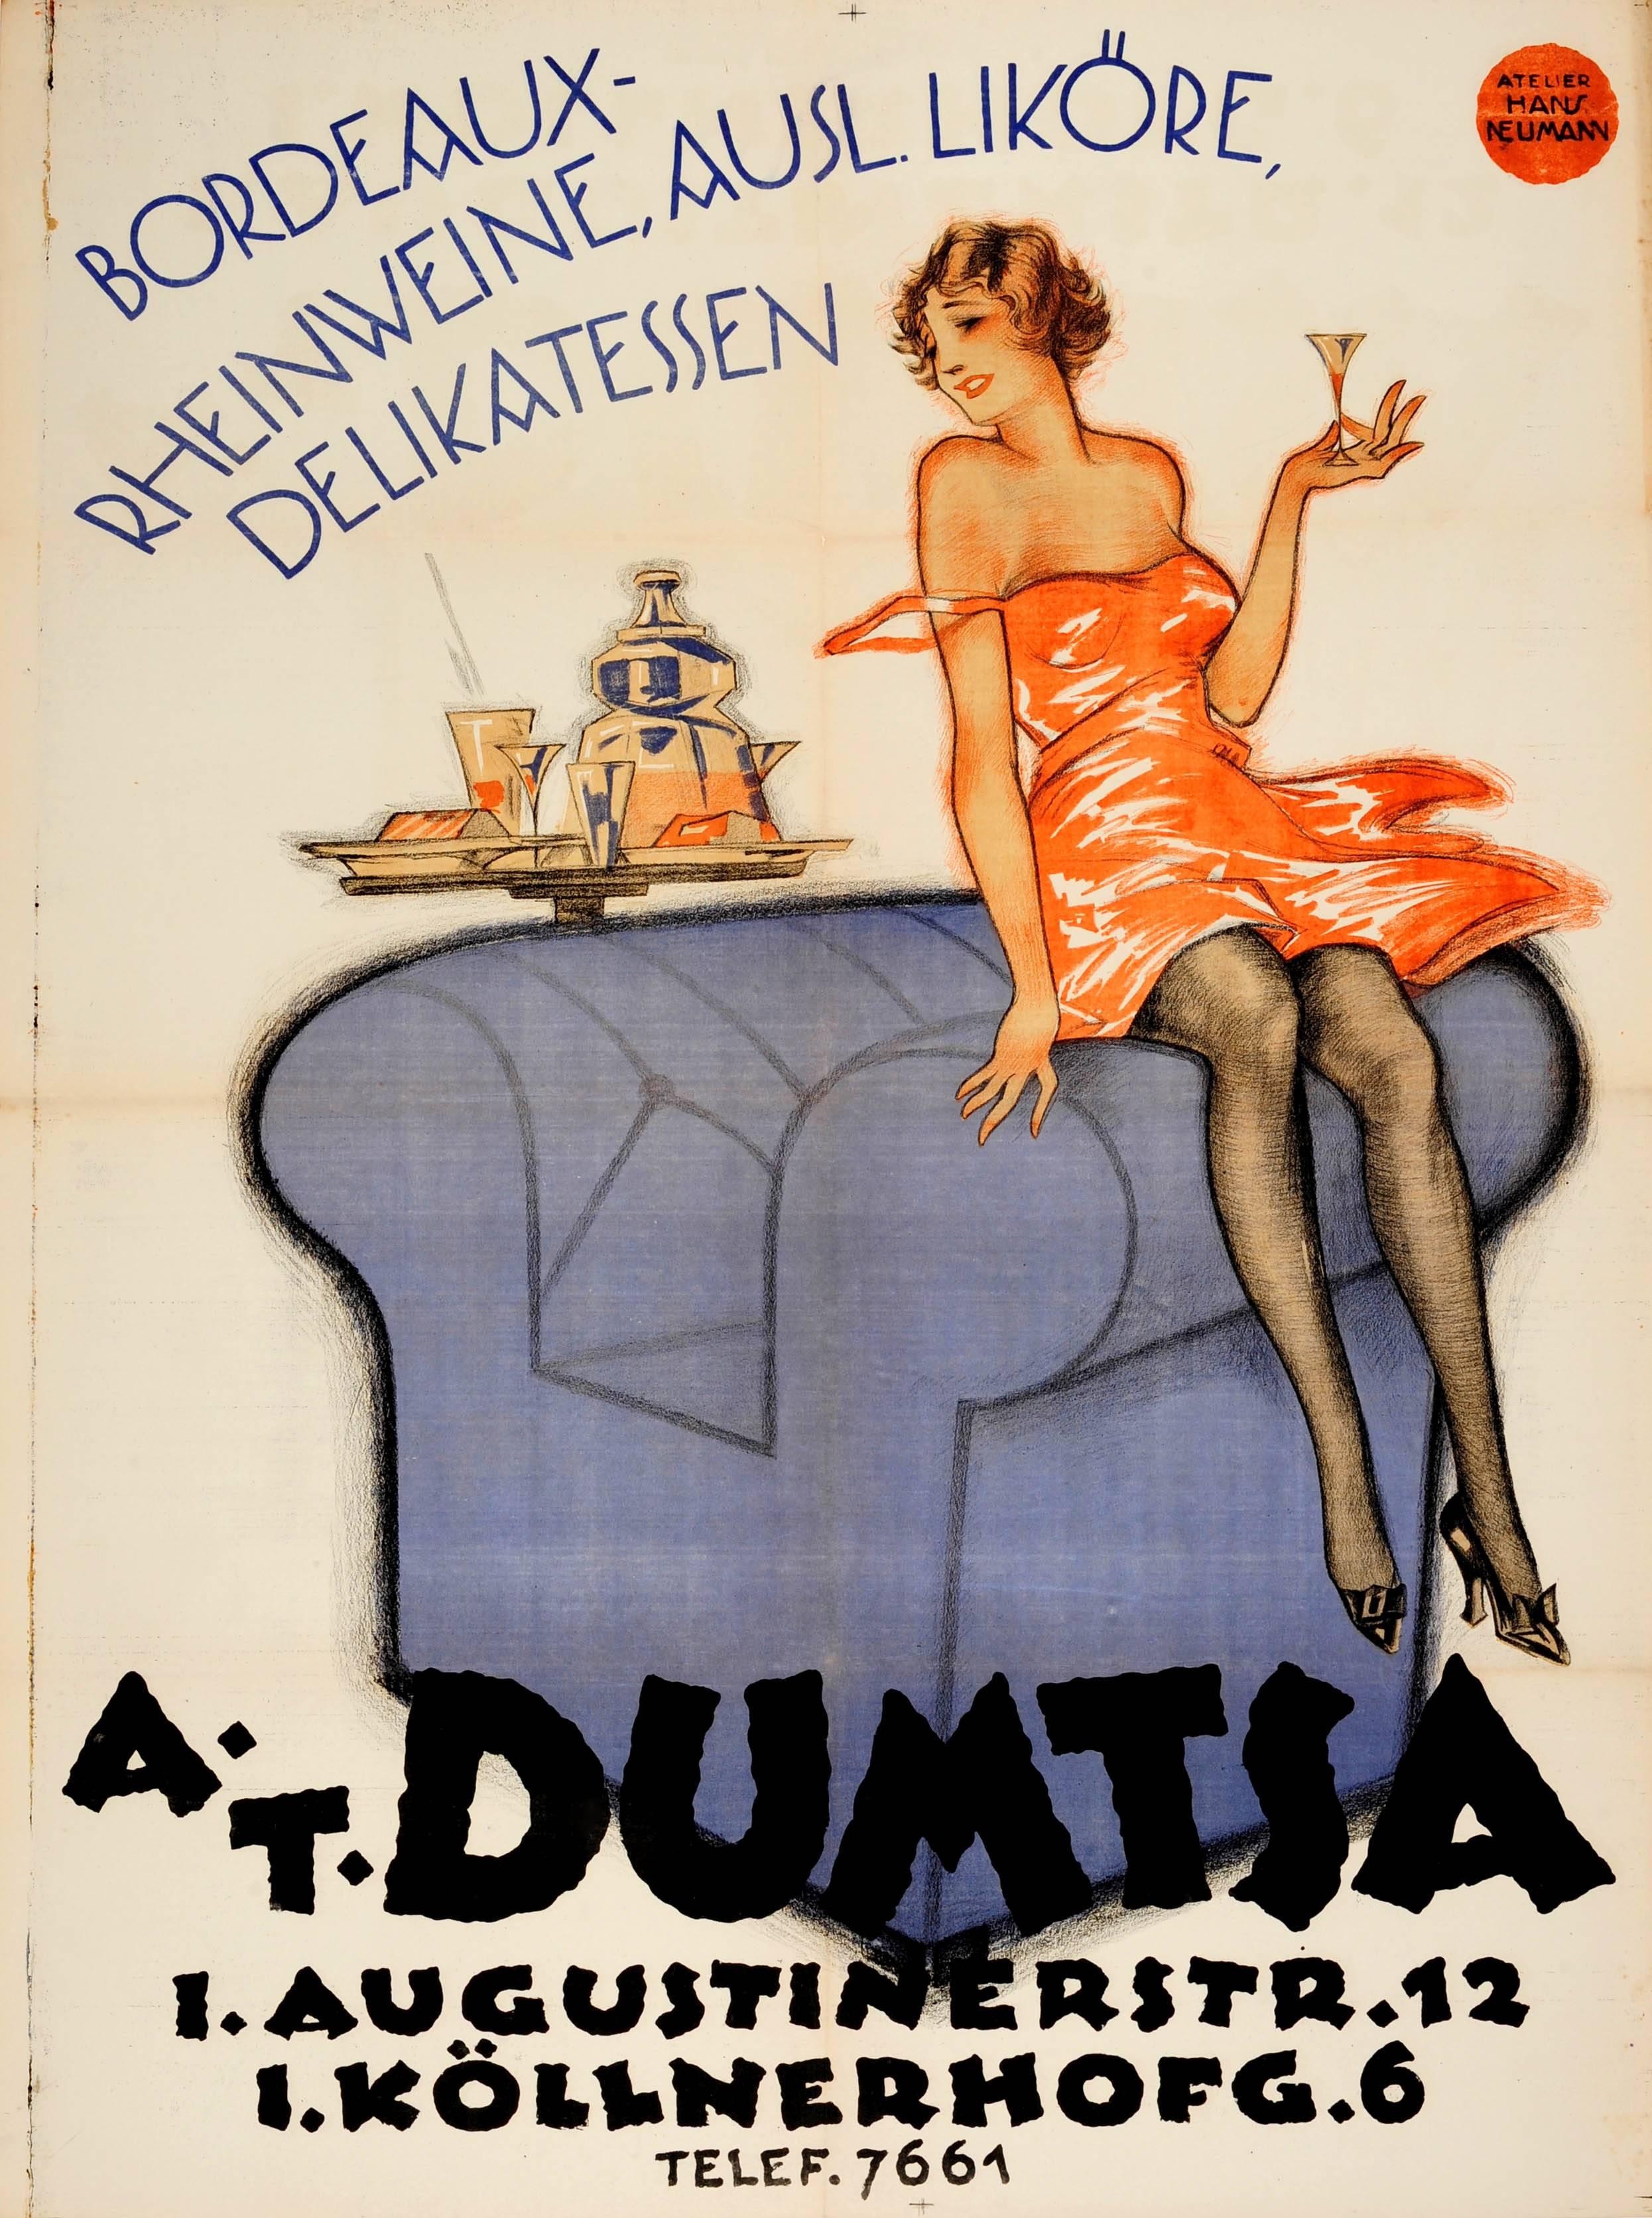 Hans Neumann Print - Original 1920s Advertising Poster For A.T. Dumtsa Wine And Delicatessen Products